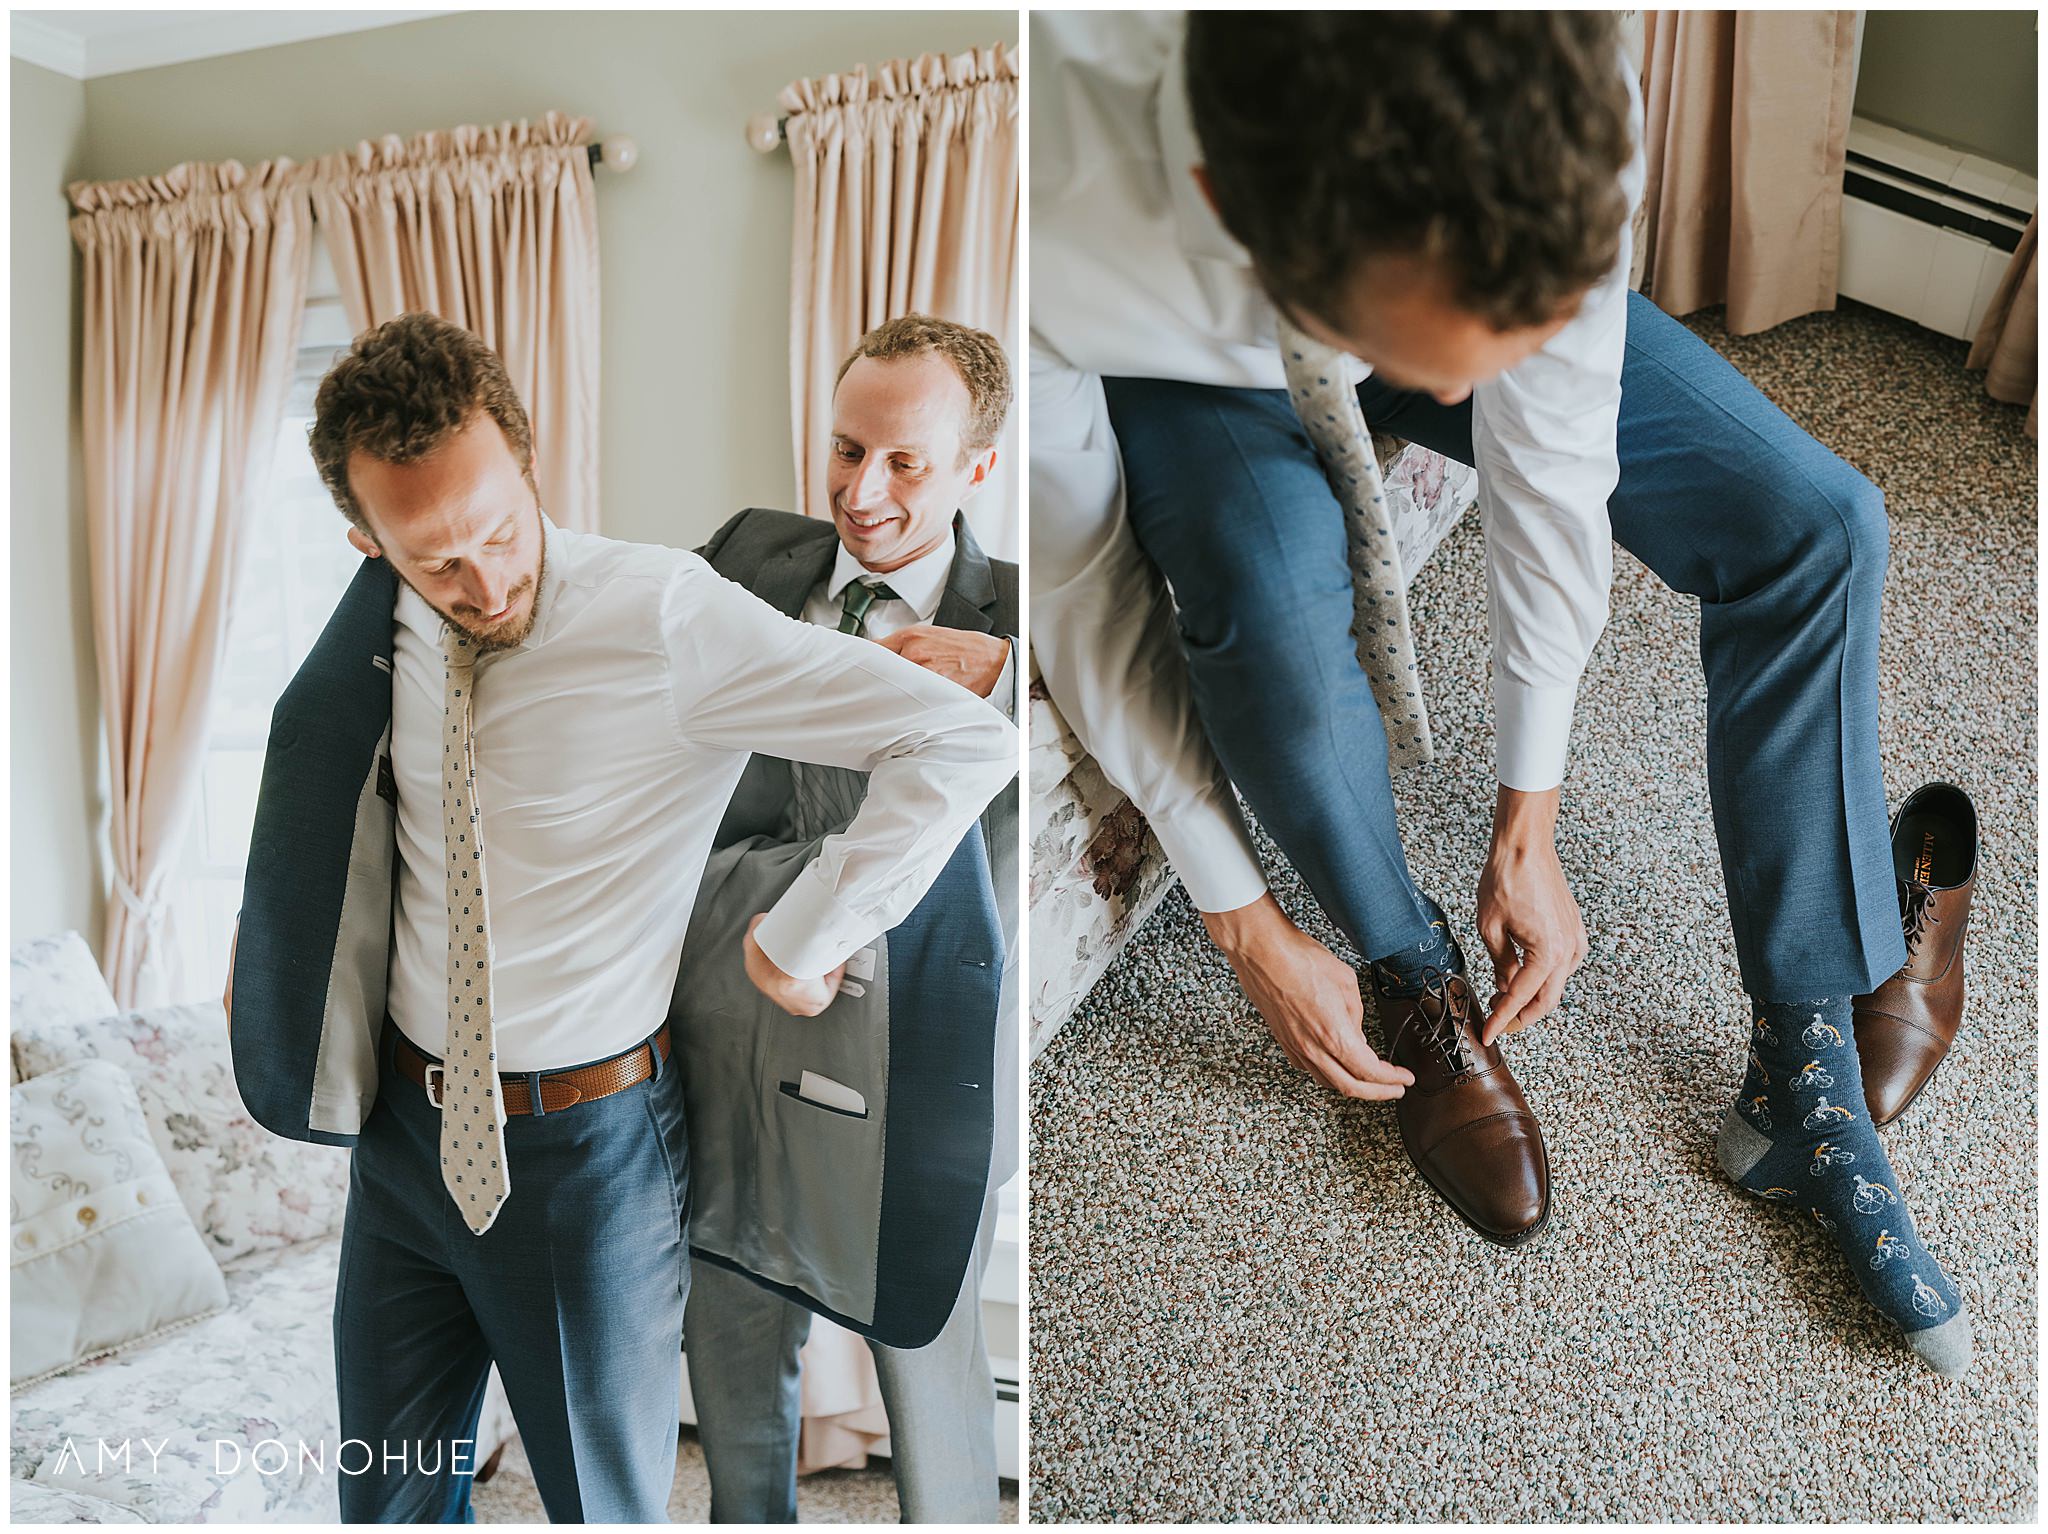 Getting Ready Details |The Fells Estate | New Hampshire Wedding Photographer | © Amy Donohue Photography